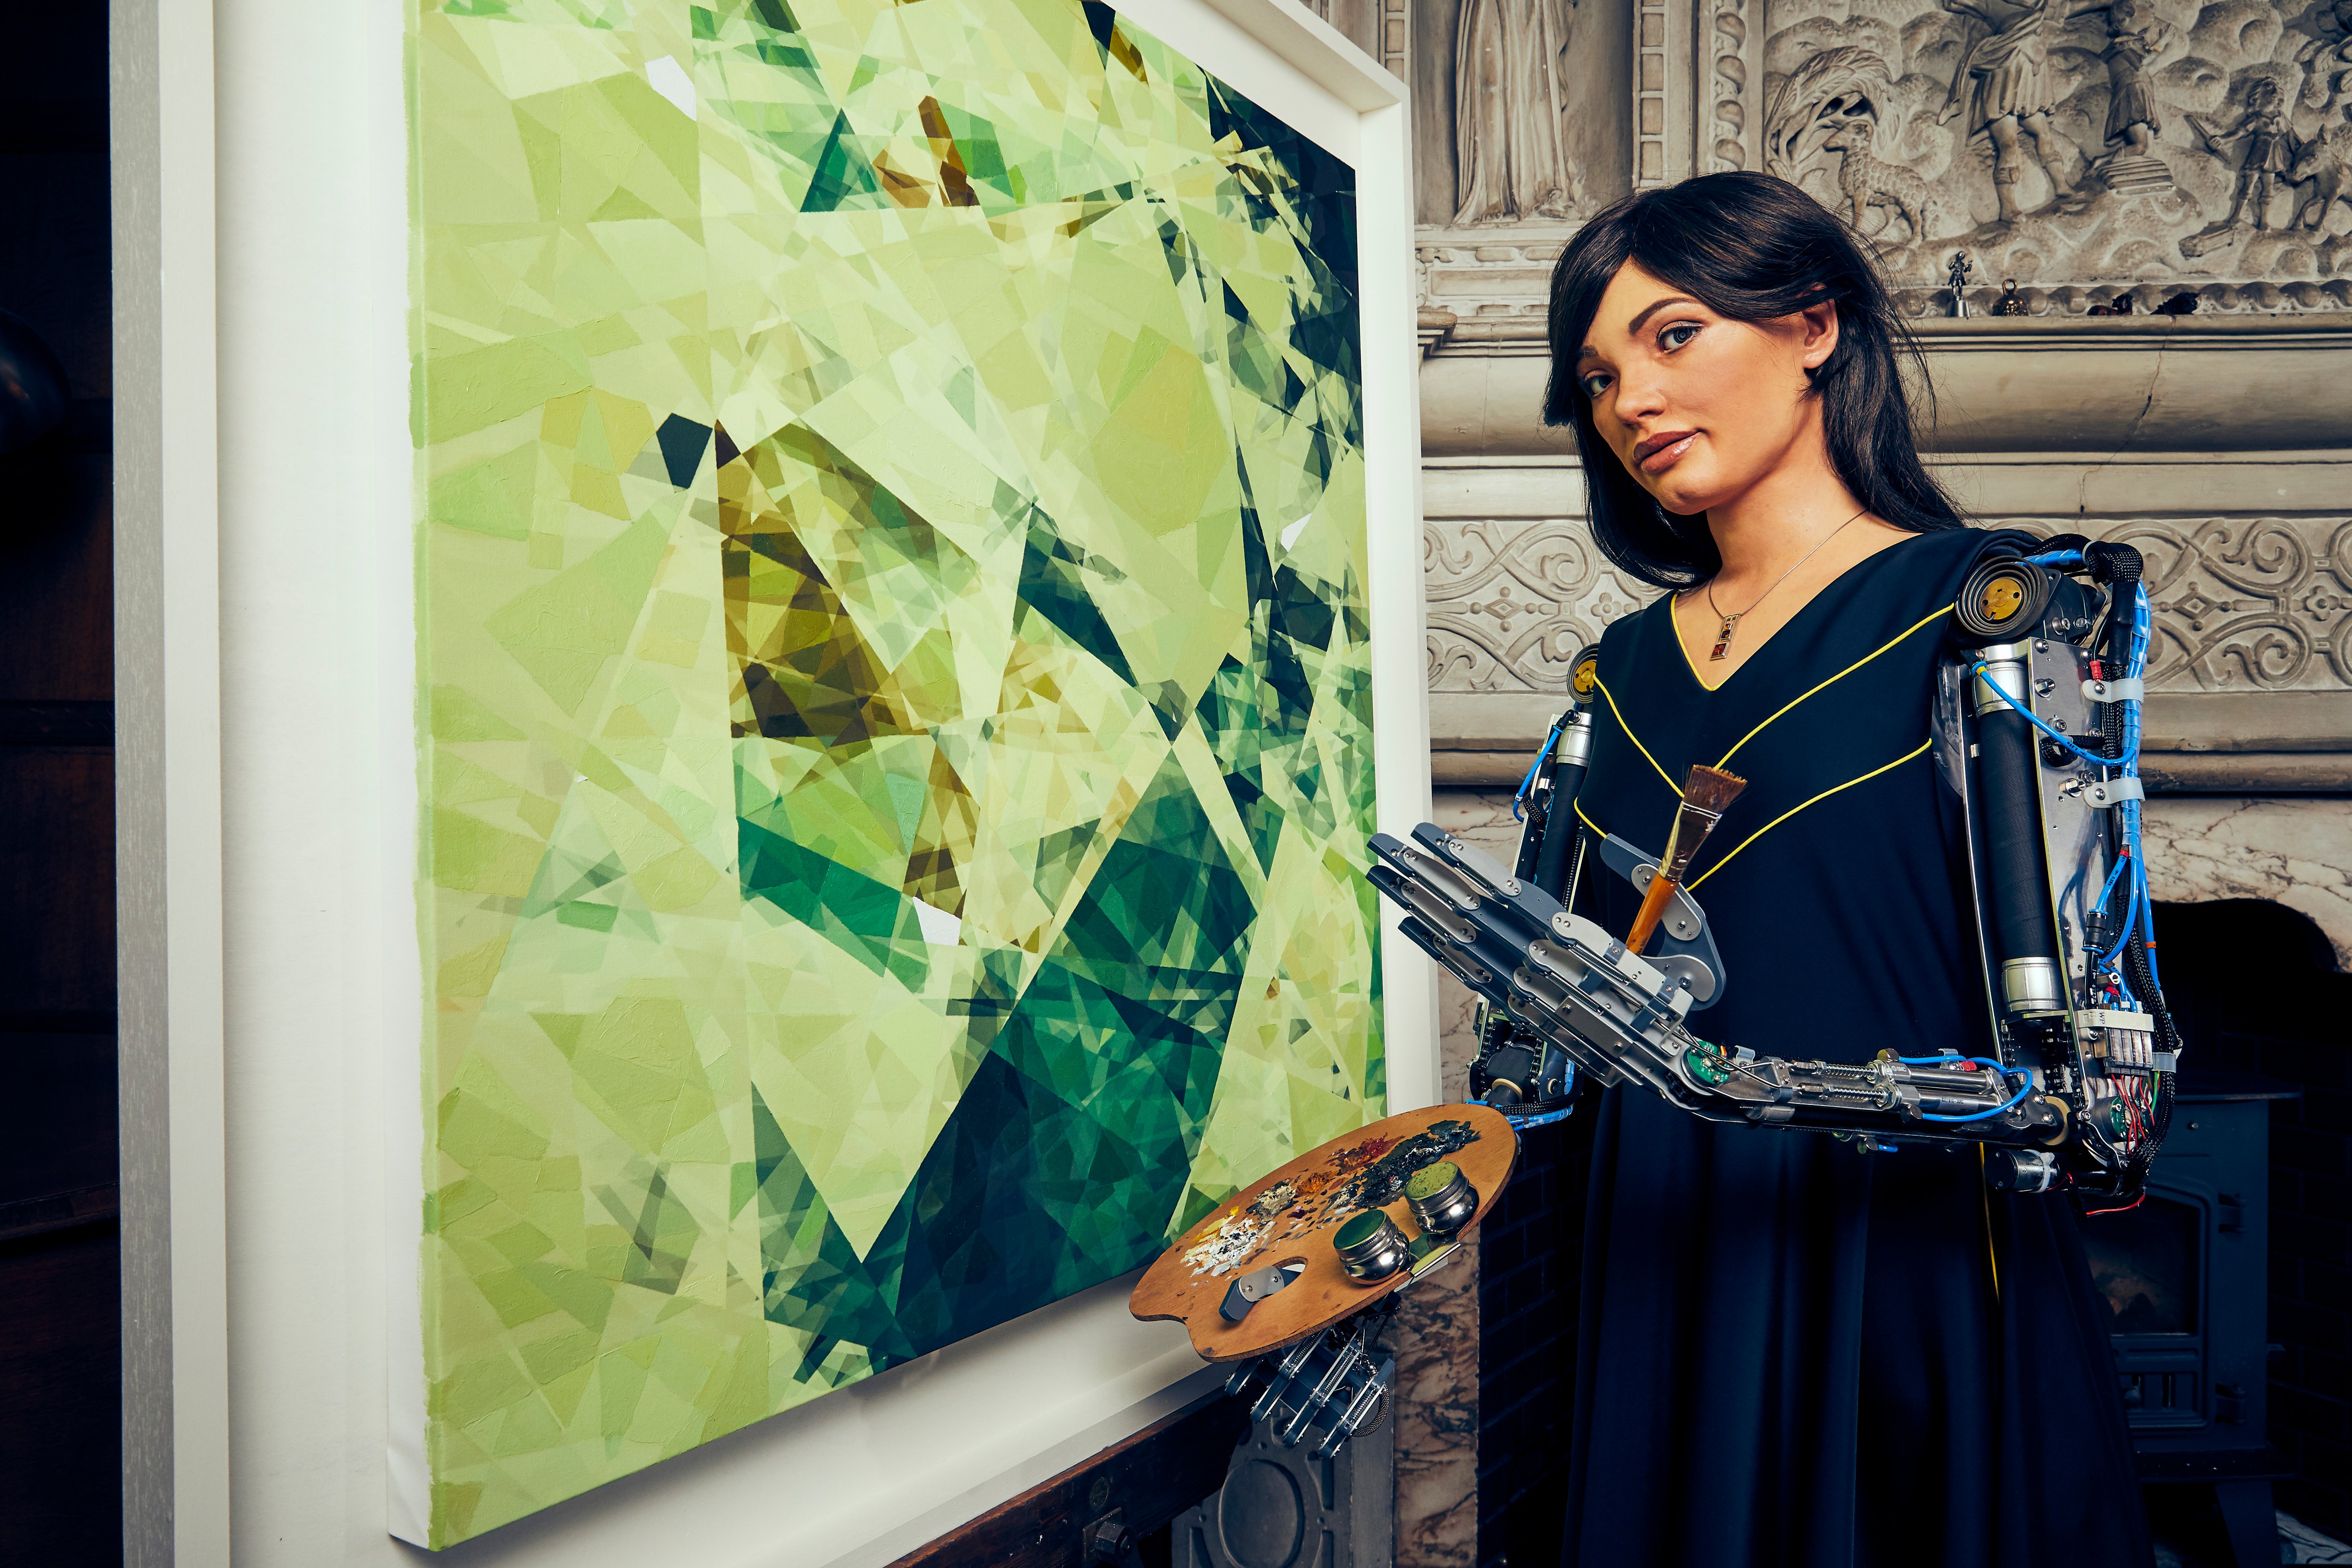 Ai-Da Robot with a painting created by her response to an oak tree